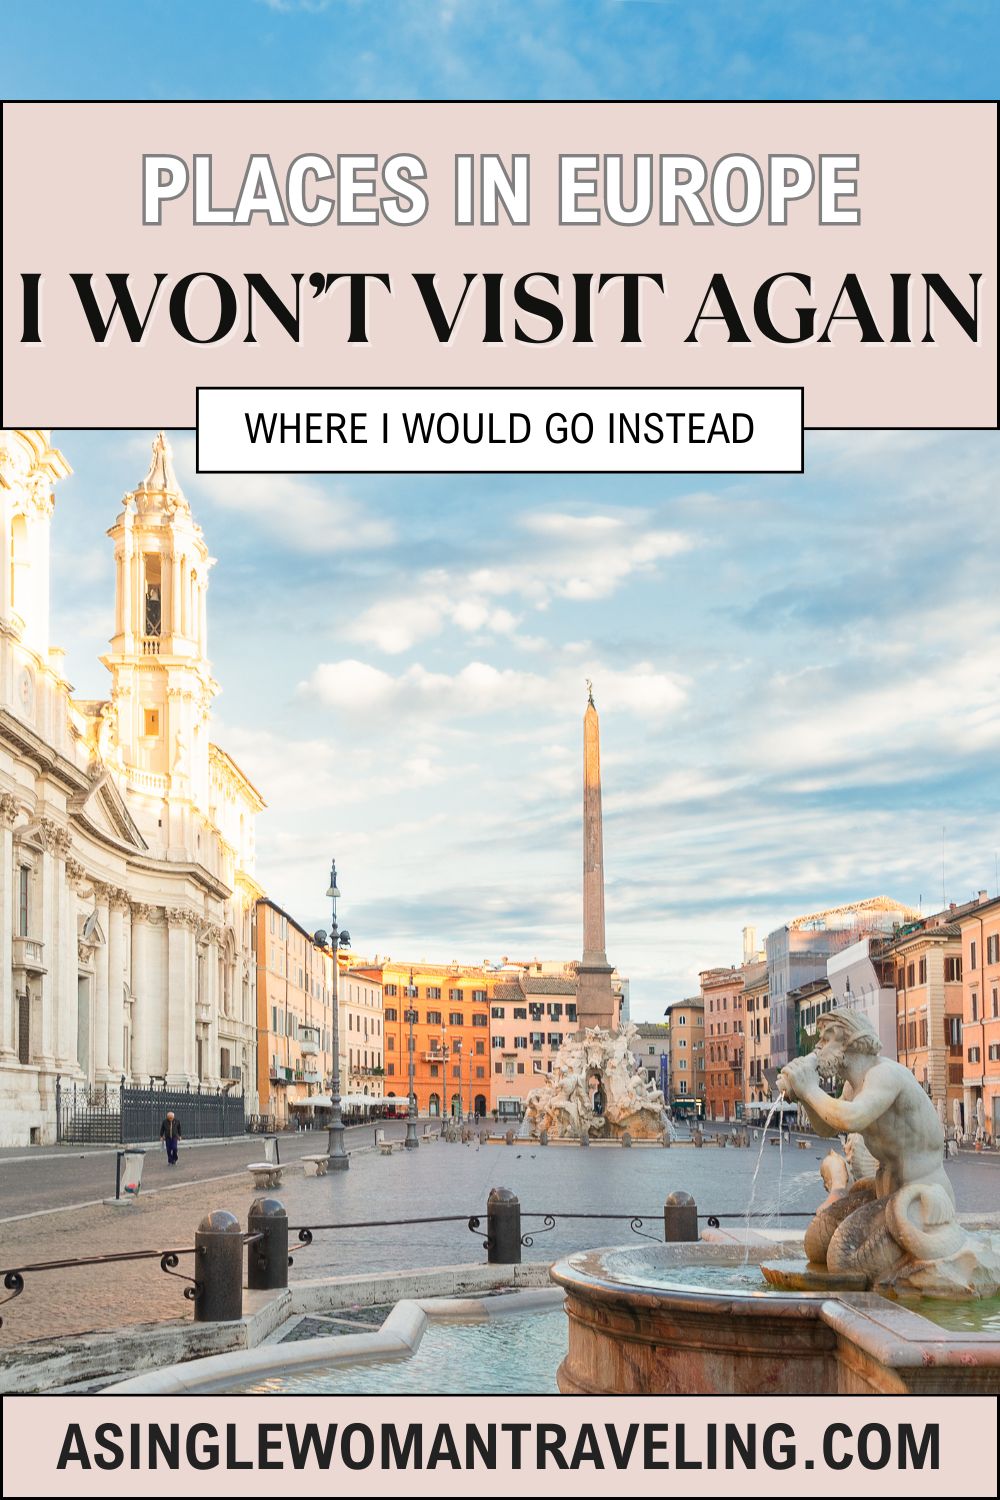 A travel-themed graphic with the title "PLACES IN EUROPE I WON'T VISIT AGAIN" and a subheading "WHERE I WOULD GO INSTEAD." The background features a picturesque European square with historical buildings, a fountain, and an obelisk. The bottom of the graphic includes the website name "ASINGLEWOMANTRAVELING.COM.